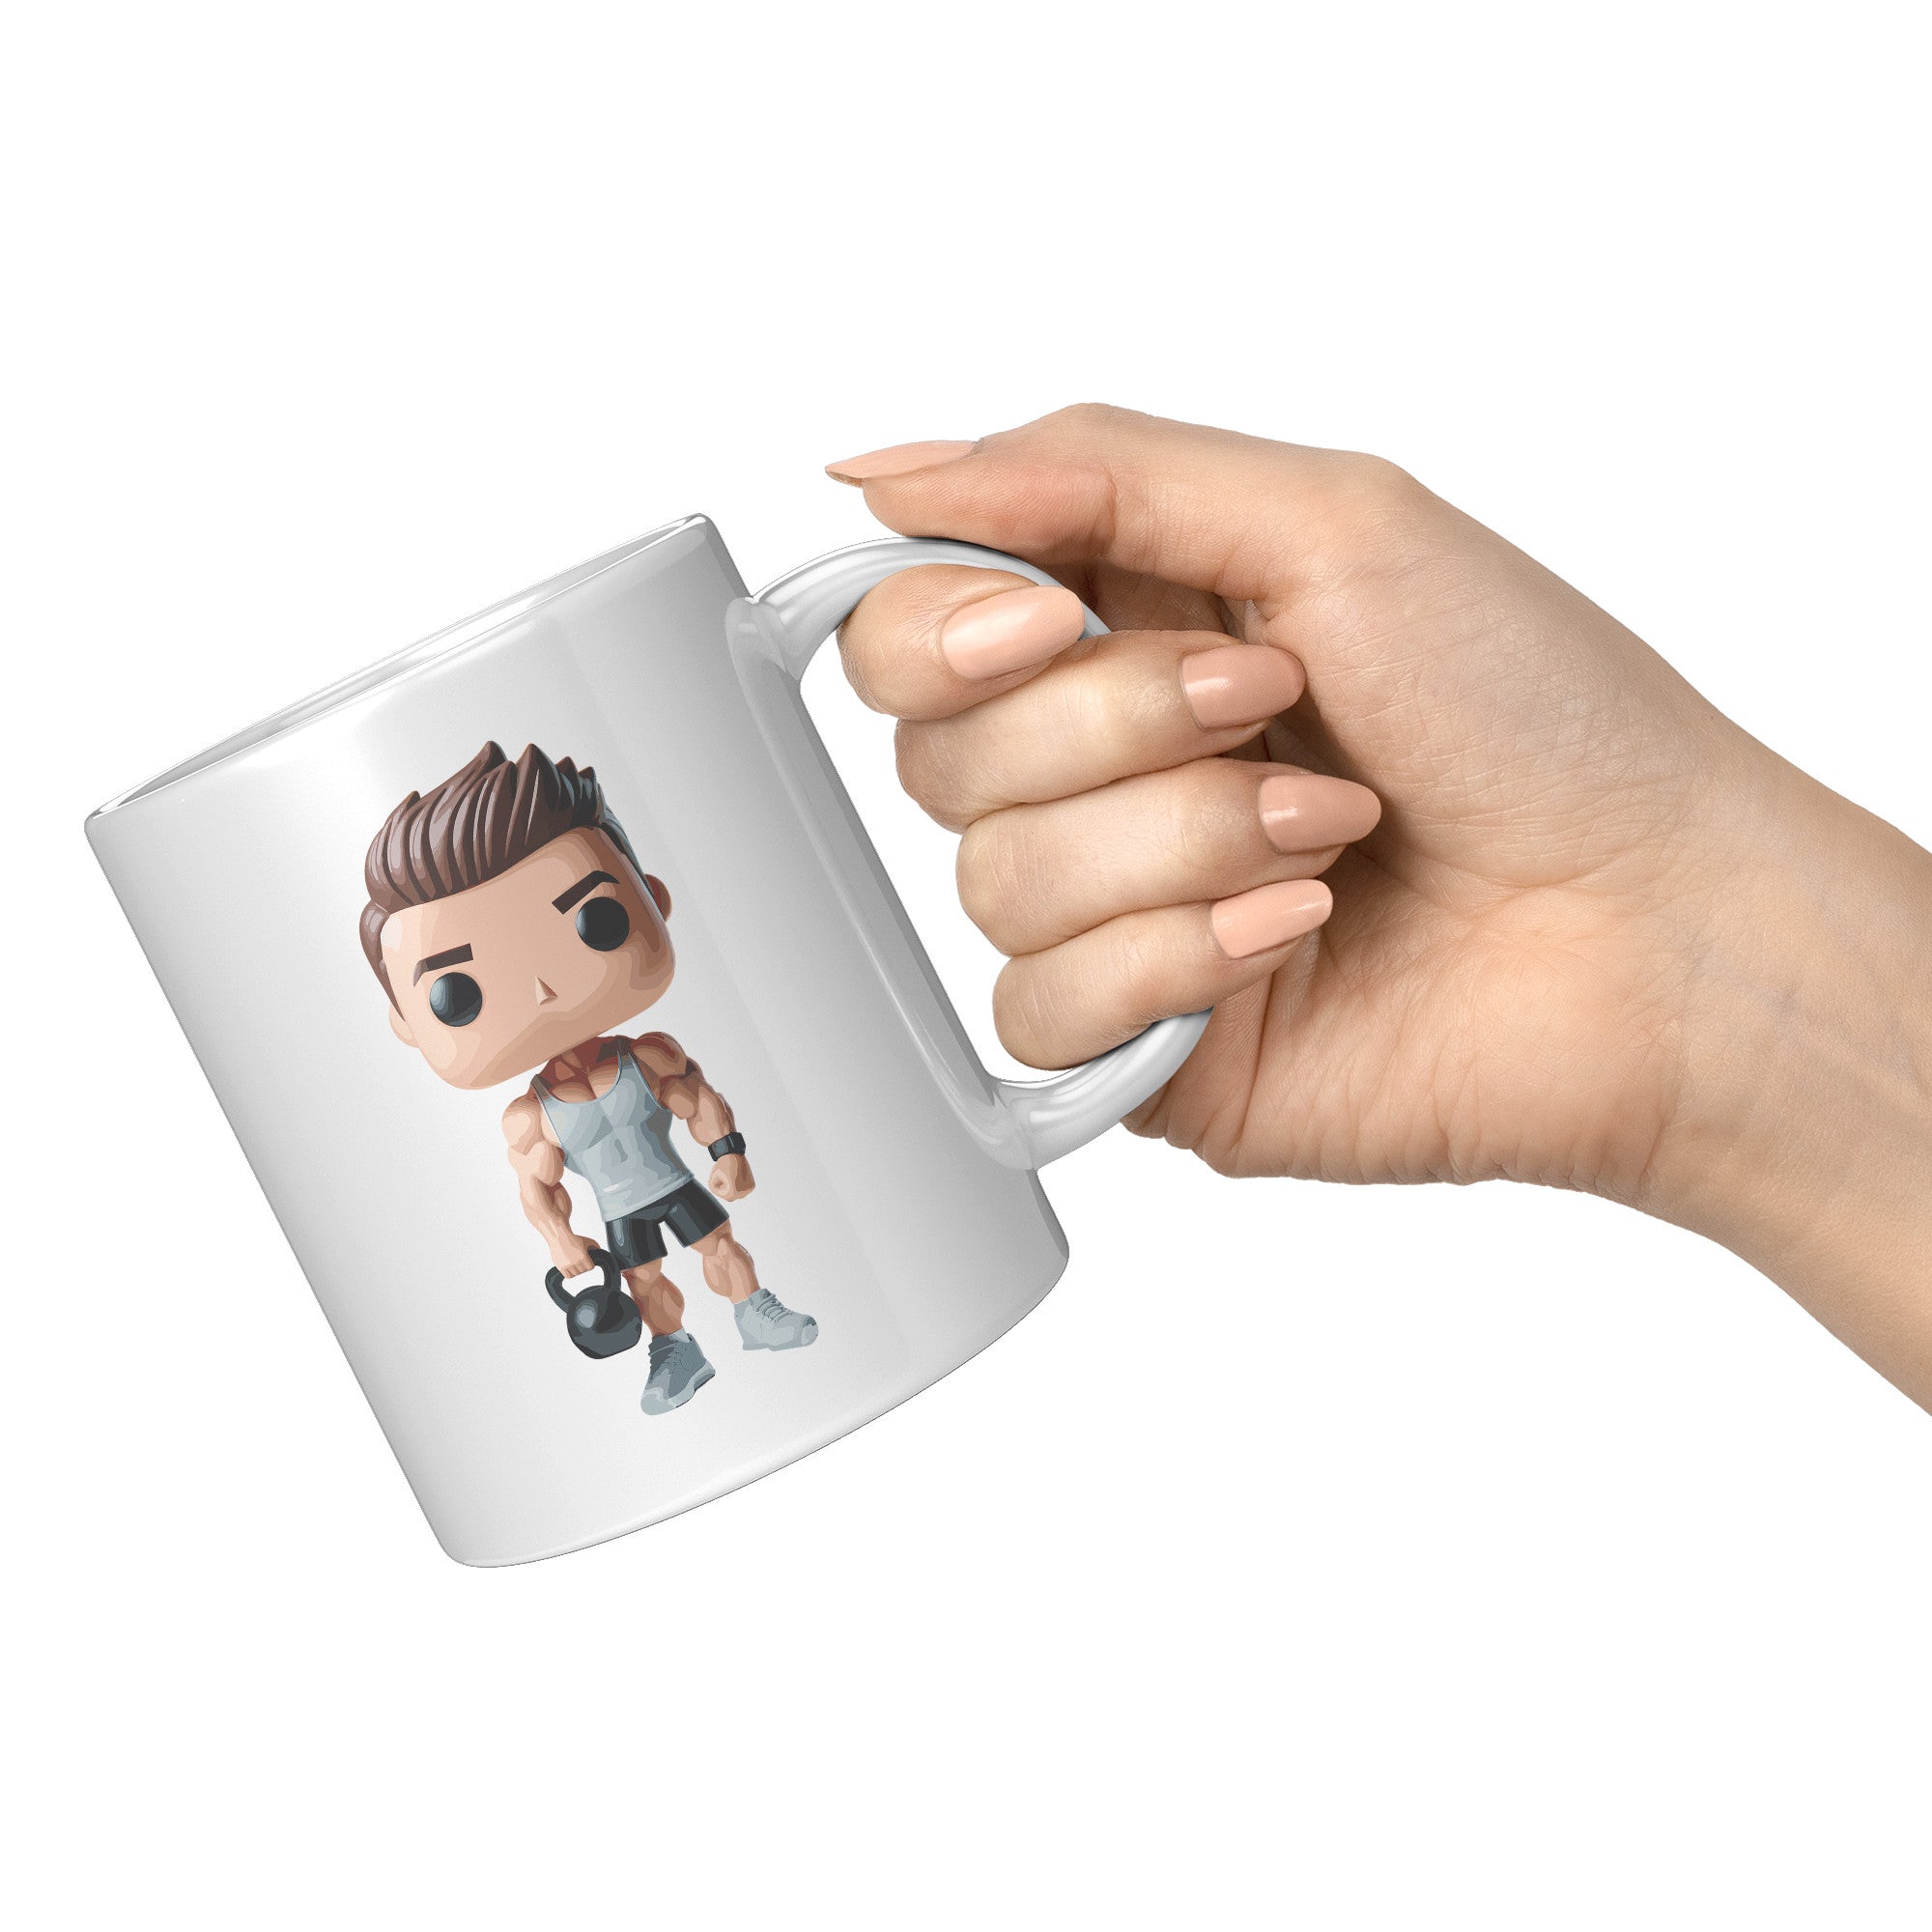 "CrossFit Funko Pop Style Mug - Male Fitness Enthusiast Coffee Cup - Unique Gift for Gym Buffs - Fun Workout-Inspired Drinkware" - B